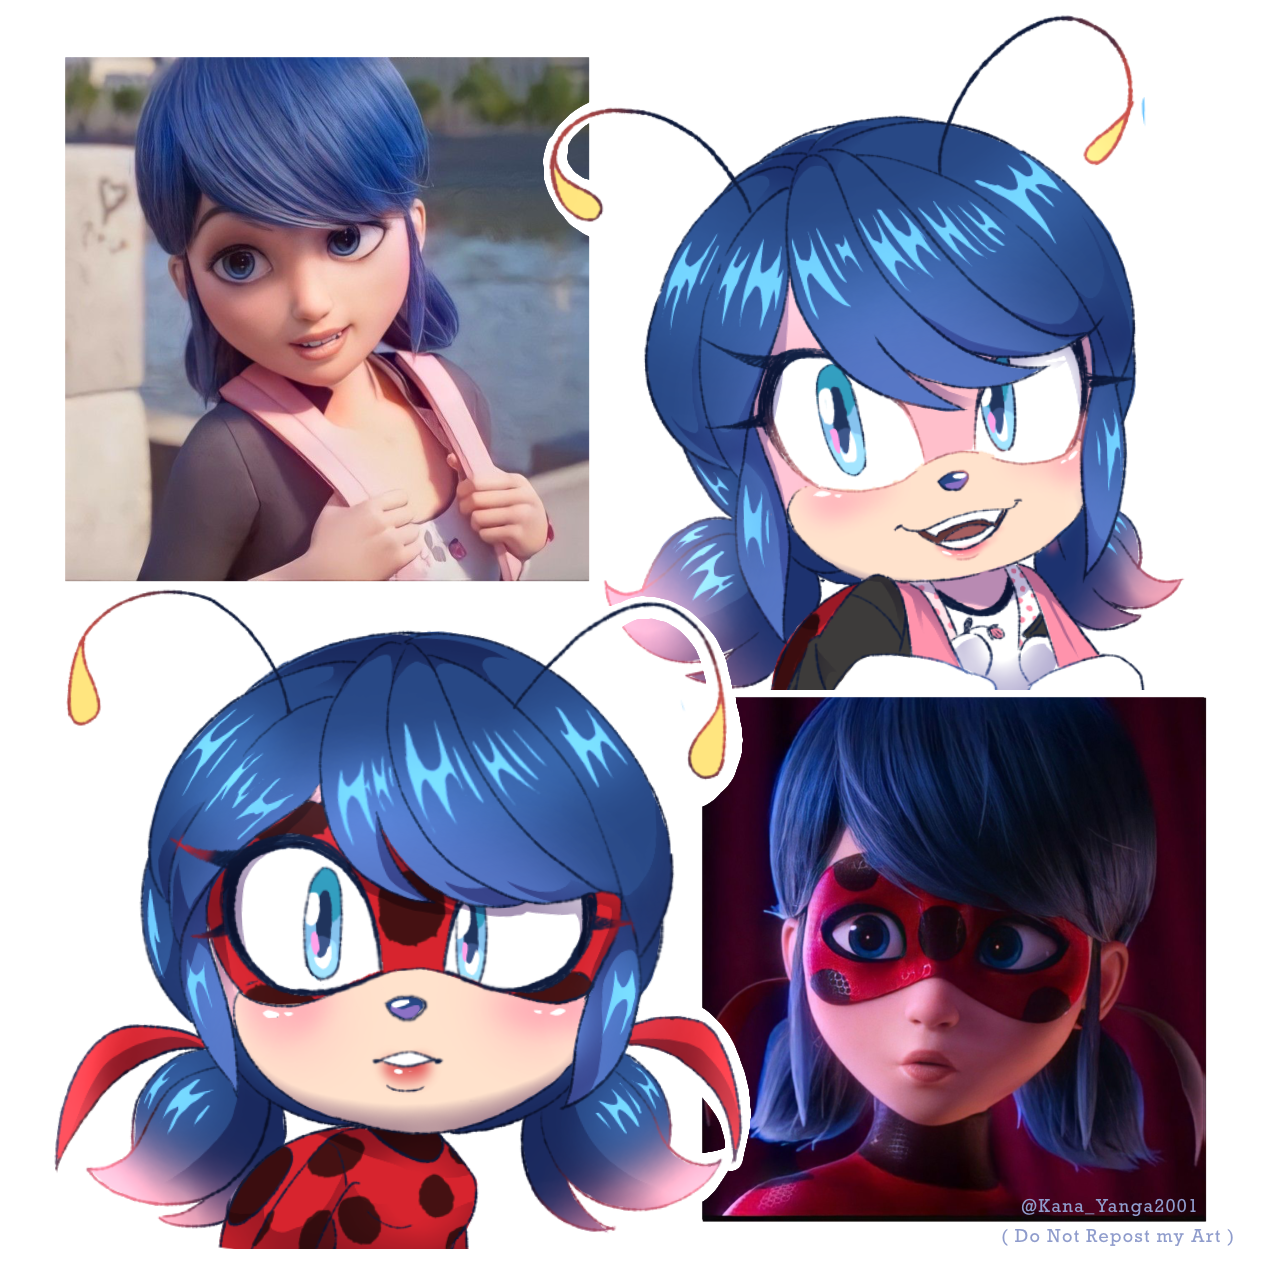 New images for the movie : r/miraculousladybug